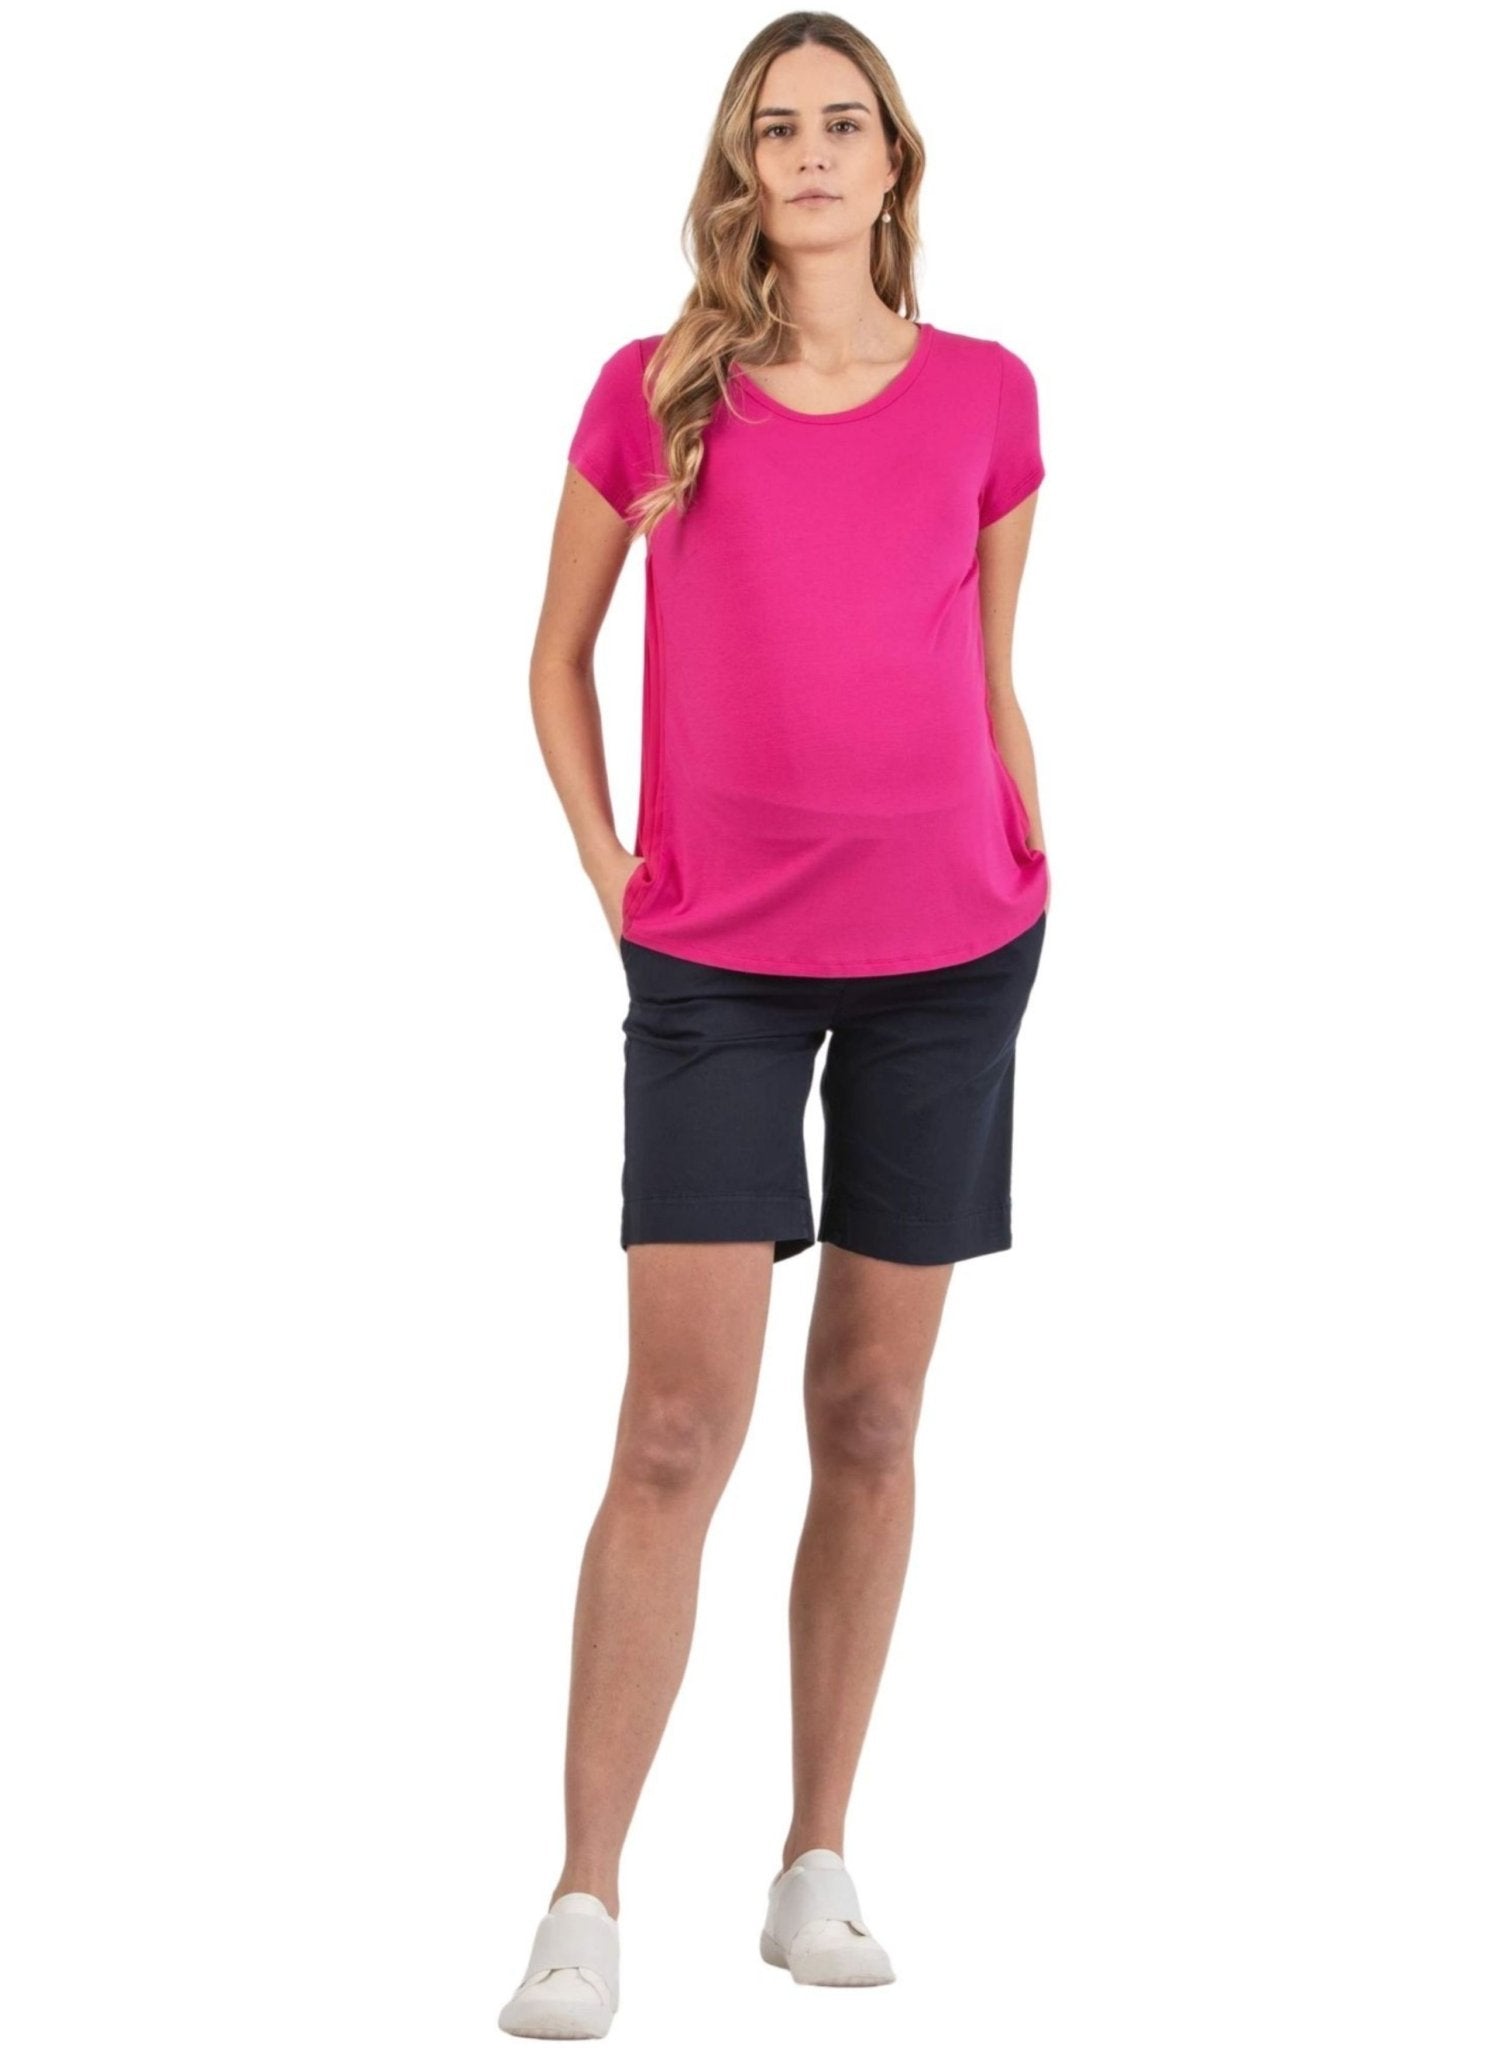 Maternity Shorts in Lightweight Cotton - Blue - Mums and Bumps